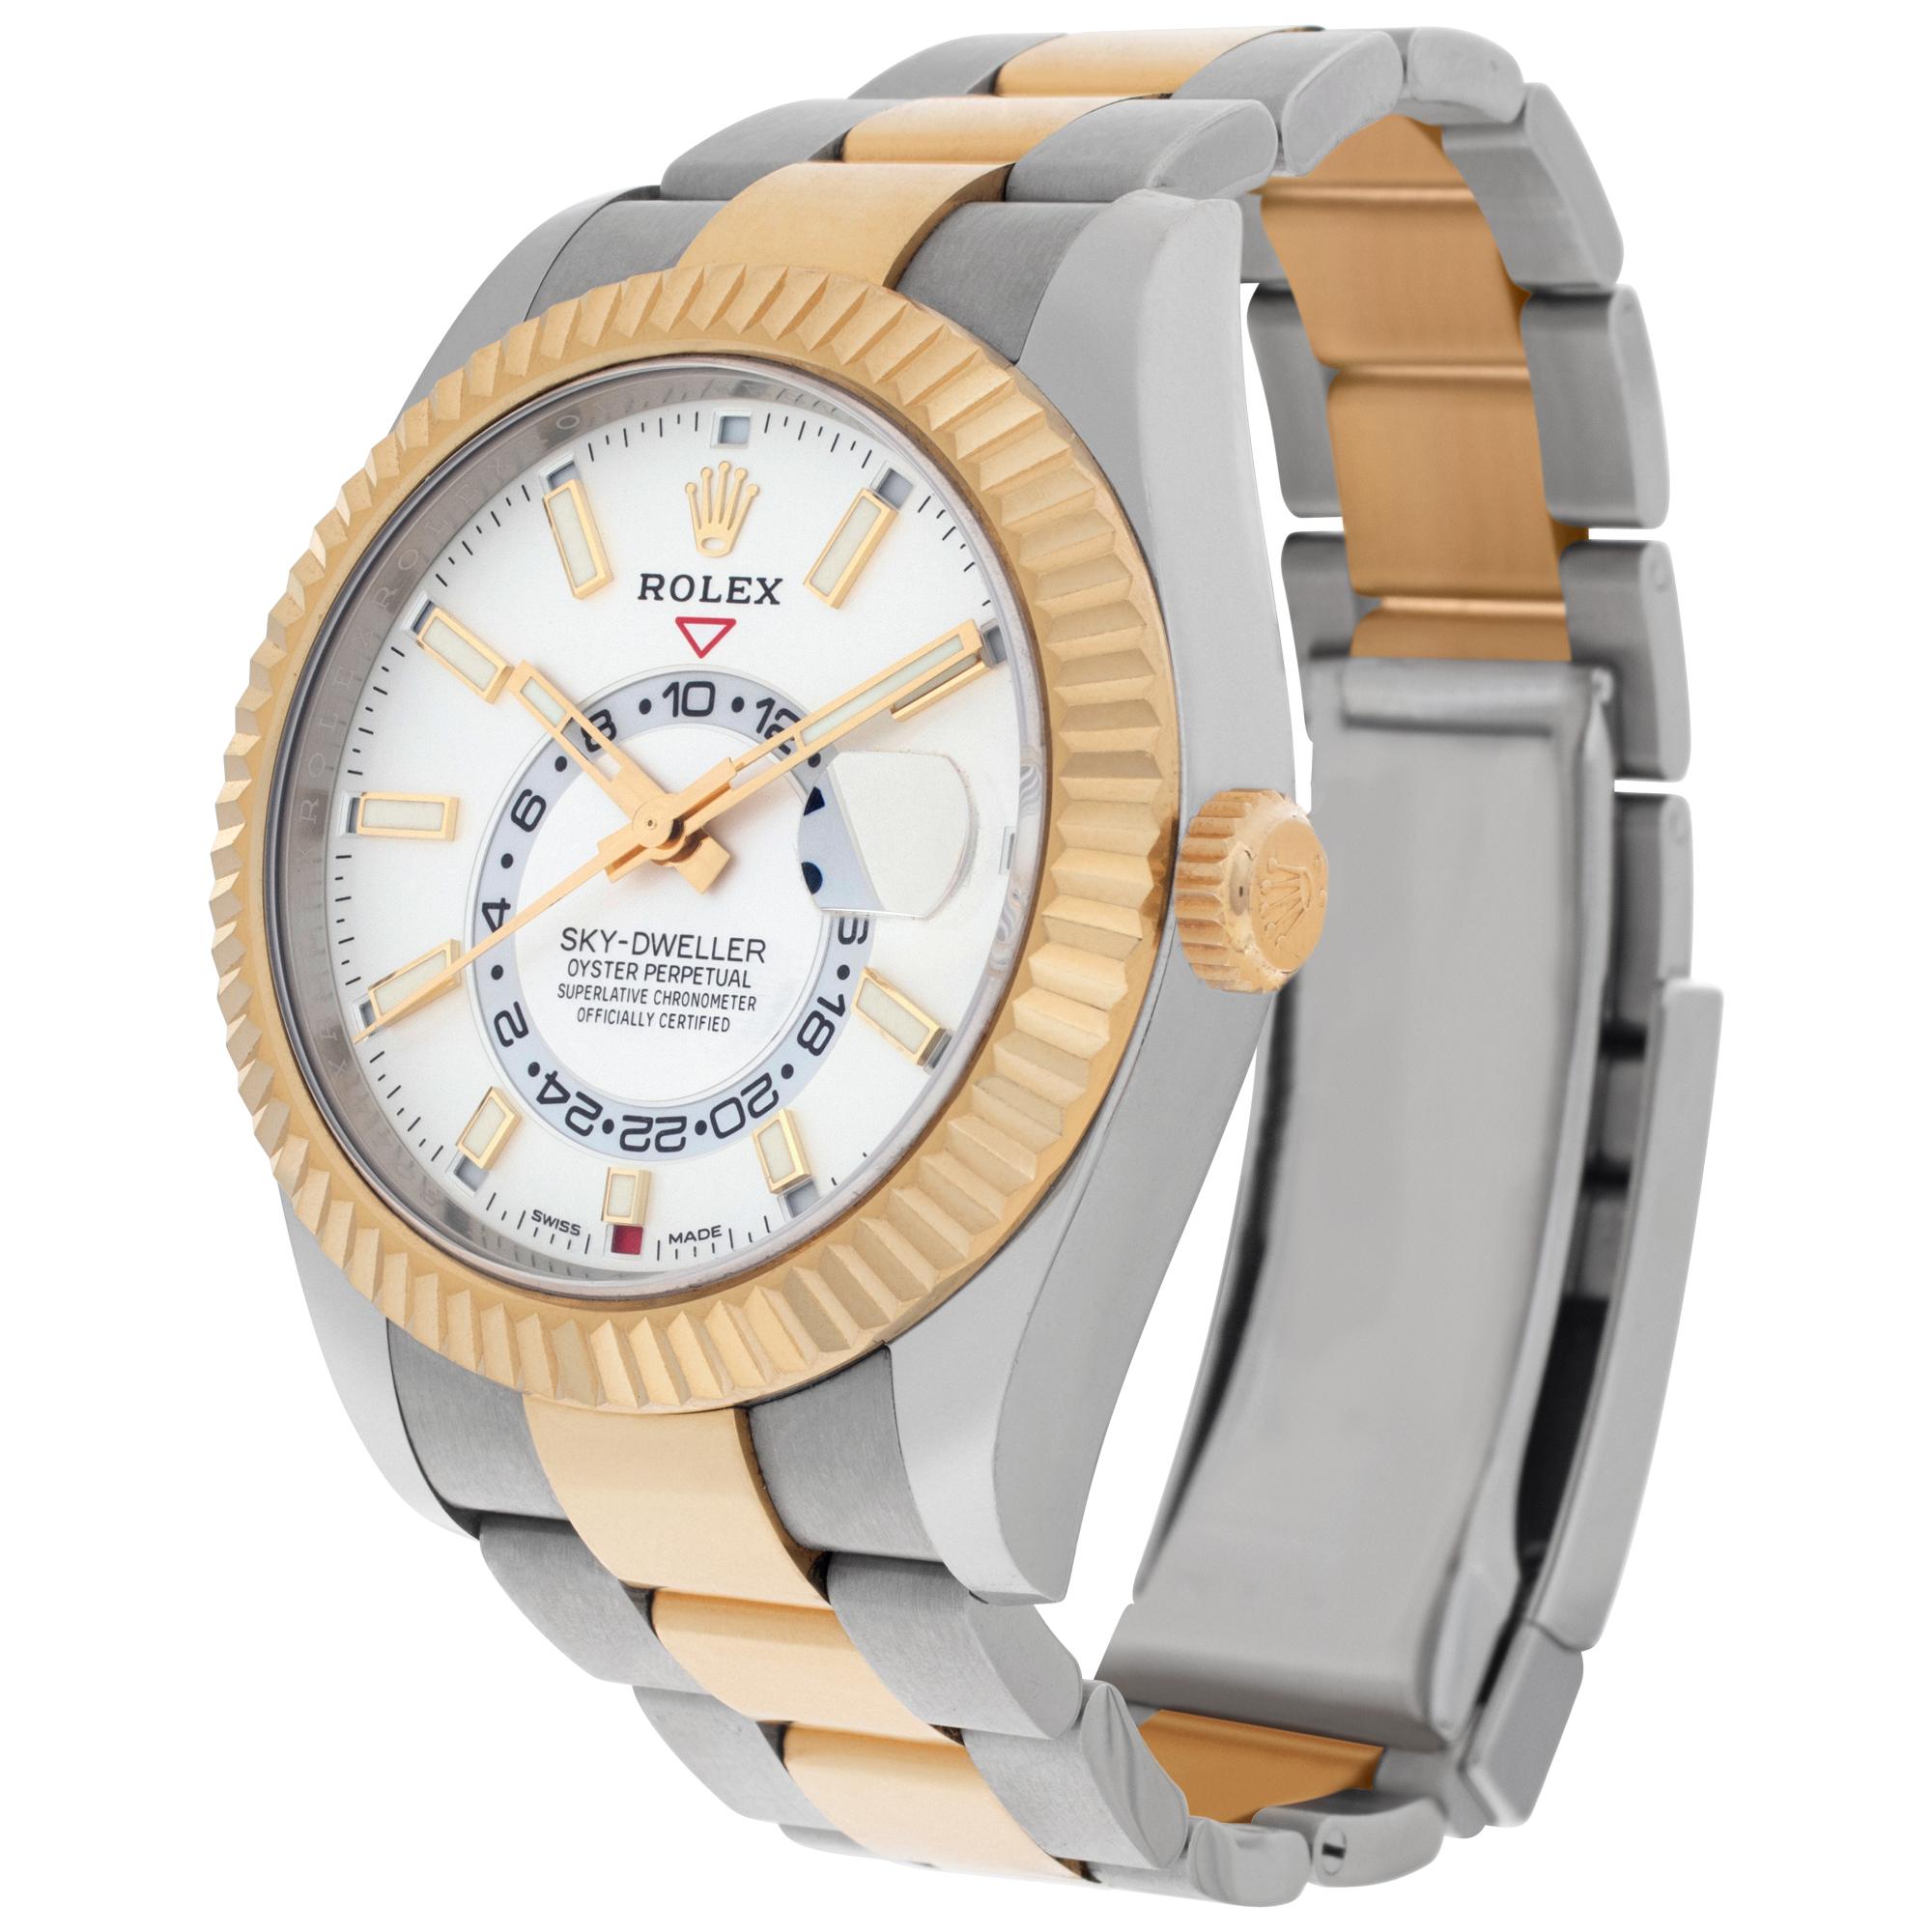 Rolex Sky-Dweller in 18k & stainless steel. Auto w/ sweep seconds, date, month, dual time, and annual calendar. With hang tag, box & booklets. 42 mm case size. **Bank wire only at this price** Ref 326933. Fine Pre-owned Rolex Watch.

 Certified